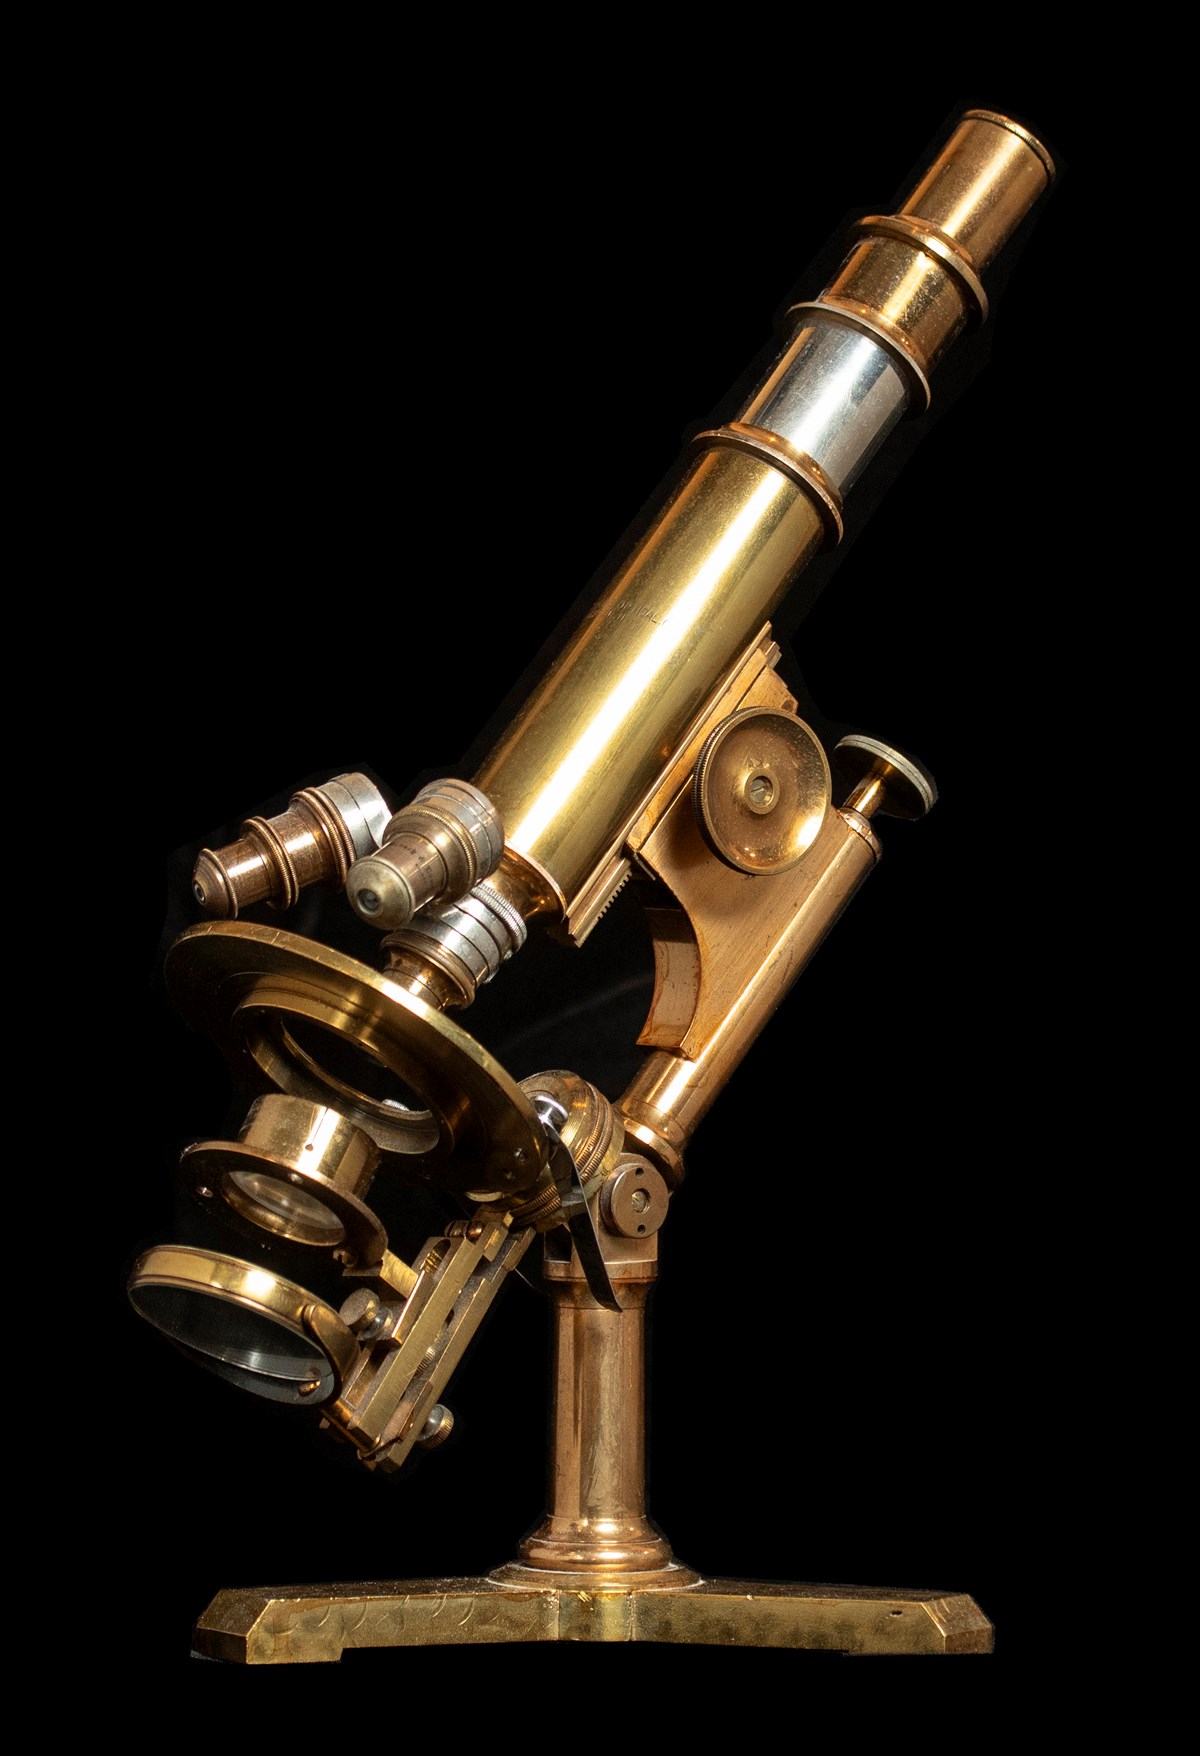 Three-quarters side view of a brass compound microscope.